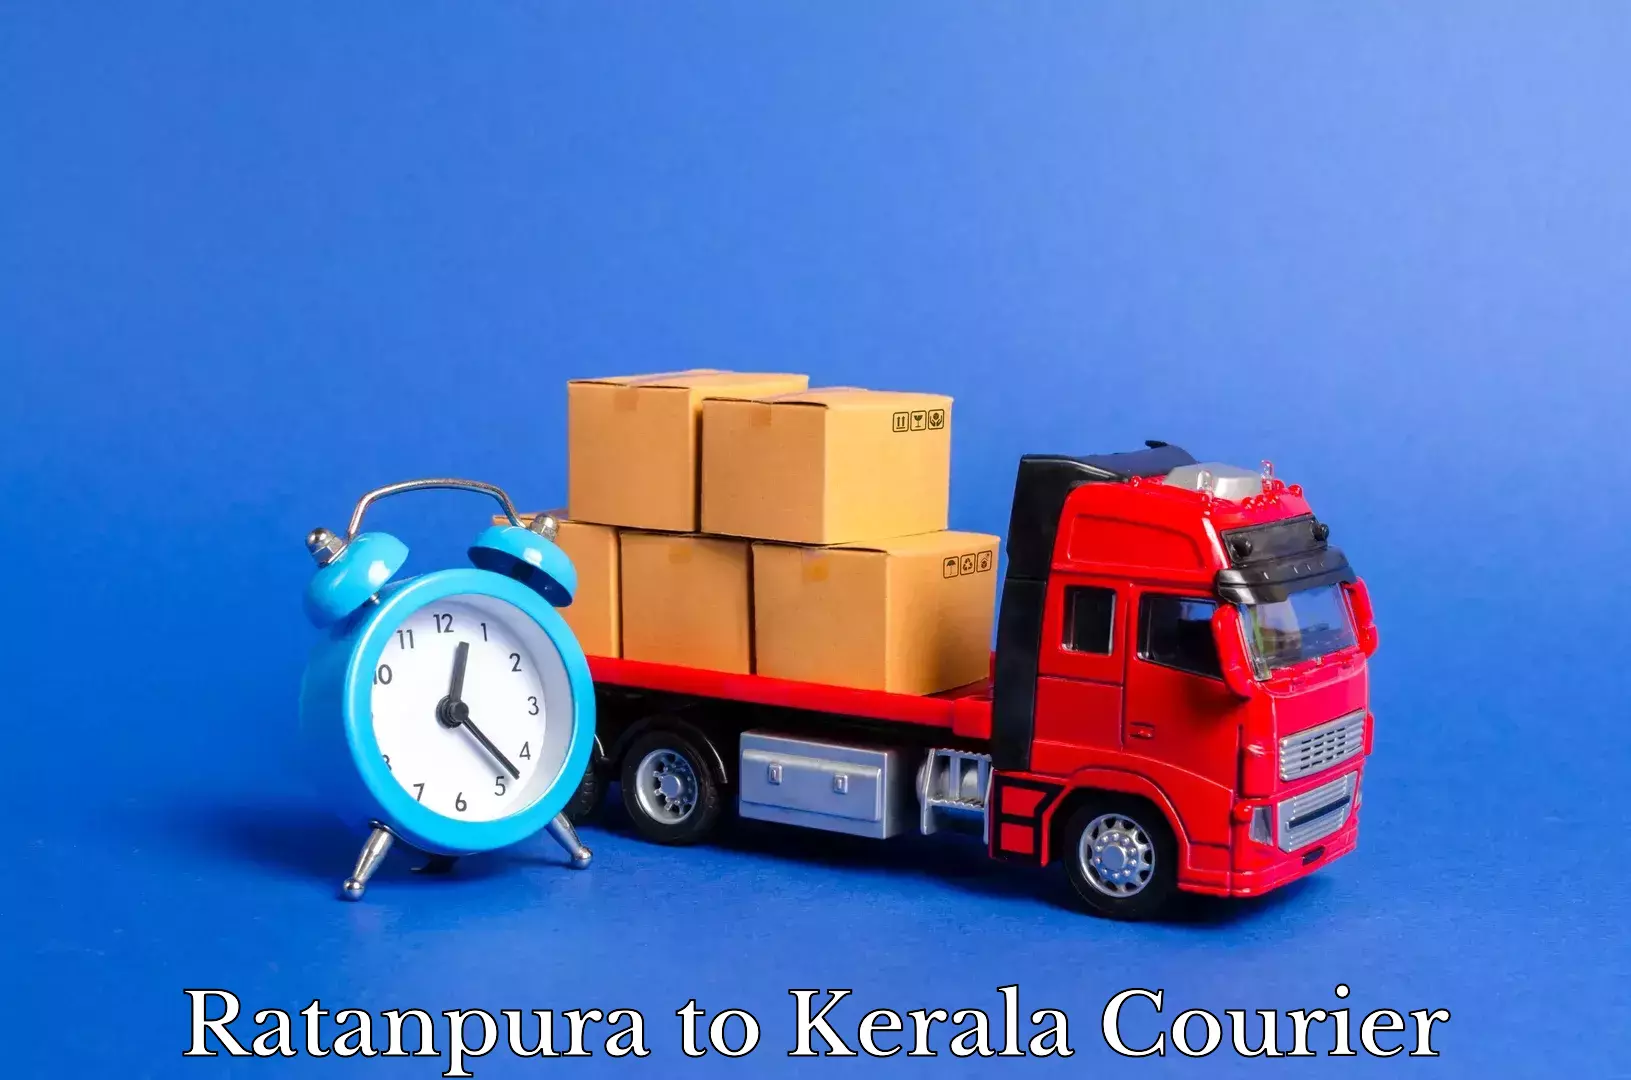 Affordable relocation services Ratanpura to Kerala